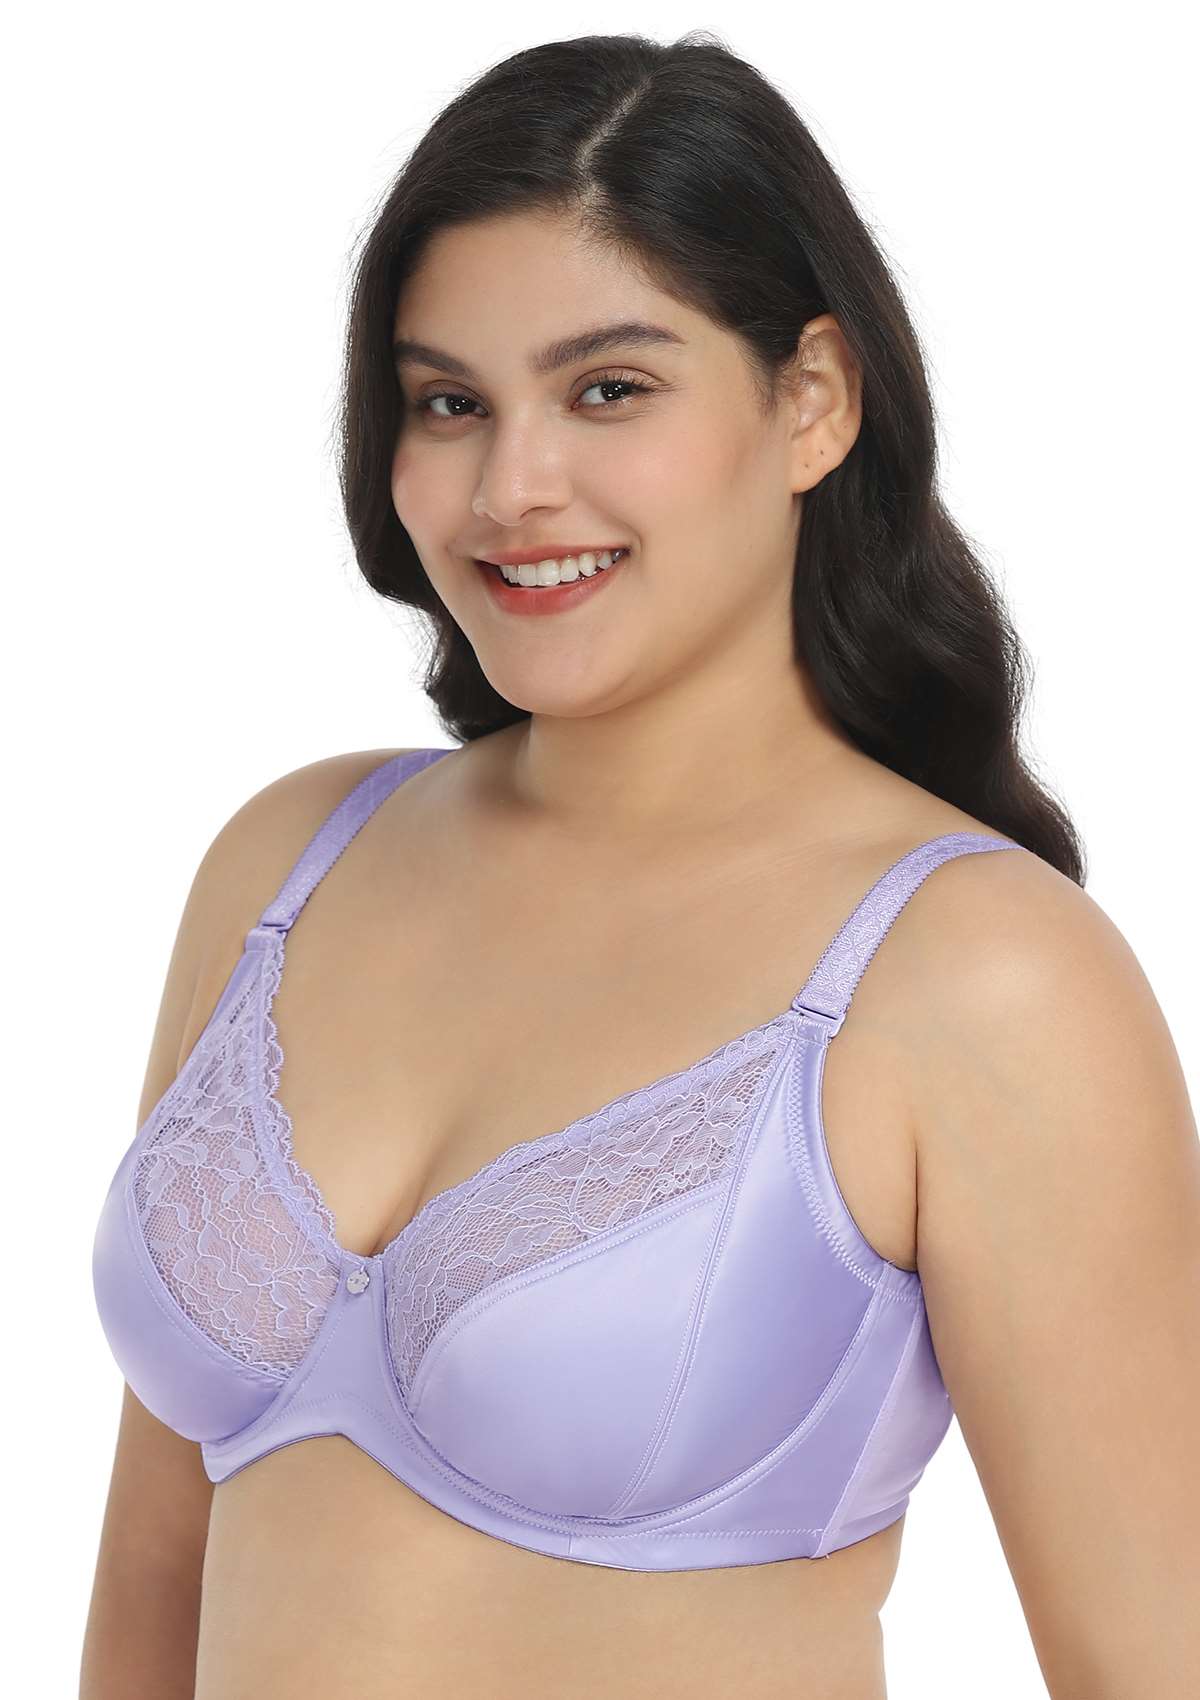 HSIA Foxy Satin Silky Full Coverage Underwire Bra With Floral Lace Trim - Champagne / 44 / C